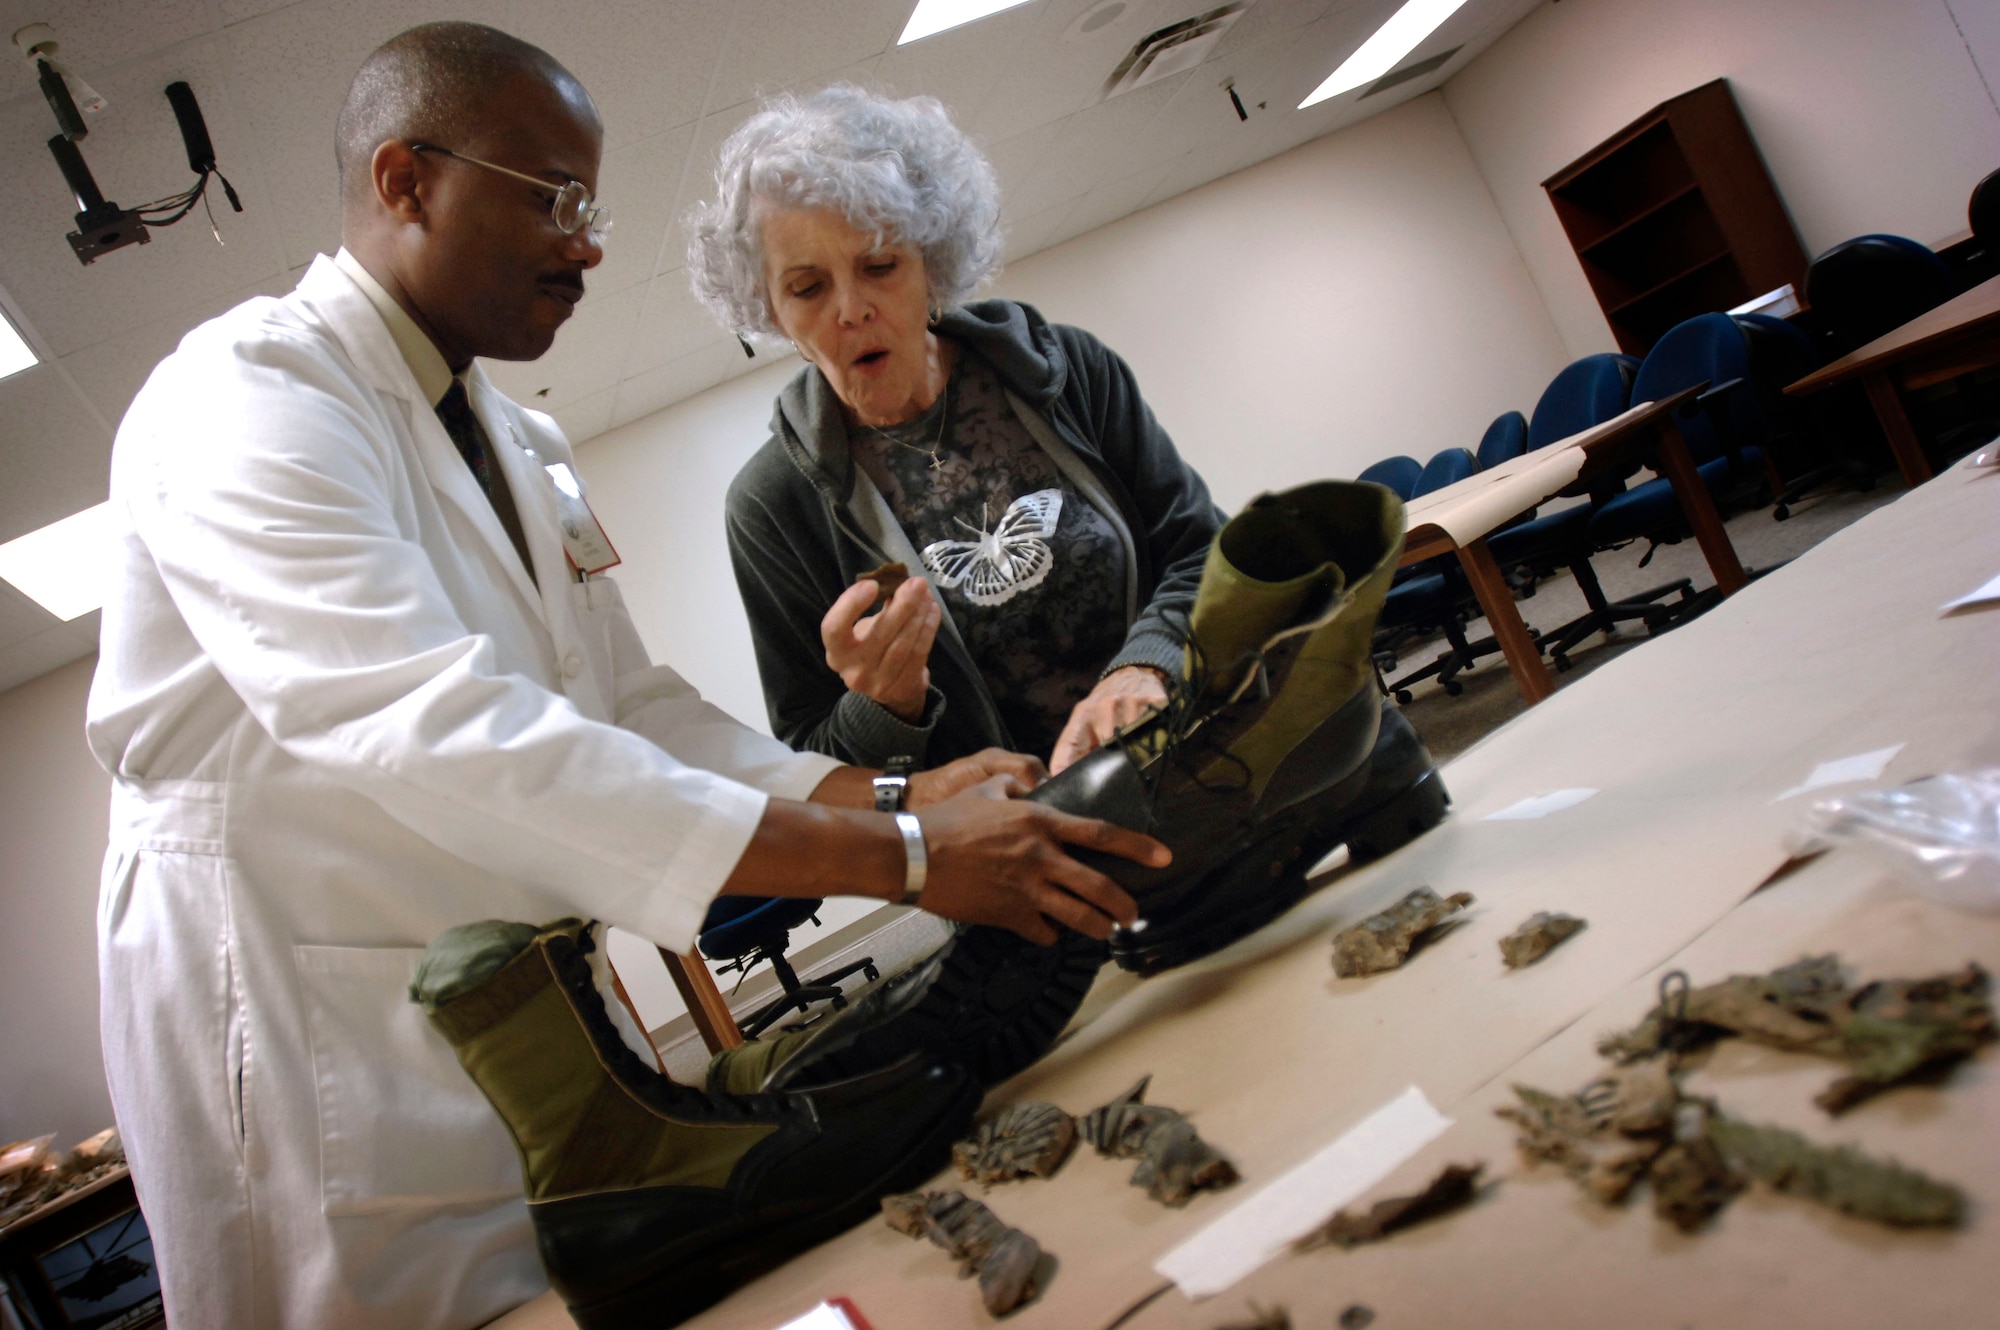 John A. Goines III, chief of the Life Sciences Equipment Laboratory, shows Sallie Stratton the remains recovered from the crash site of her husband, Air Force Lt. Col. Charles W. Stratton, whose bomber went down Jan. 3, 1971, over Laos. The lab, at Brooks City-Base in San Antonio, helps the Joint POW/MIA Accounting Command, based in Hawaii, identify servicemembers still missing from past wars. DoD photo by Fred W. Baker III  
